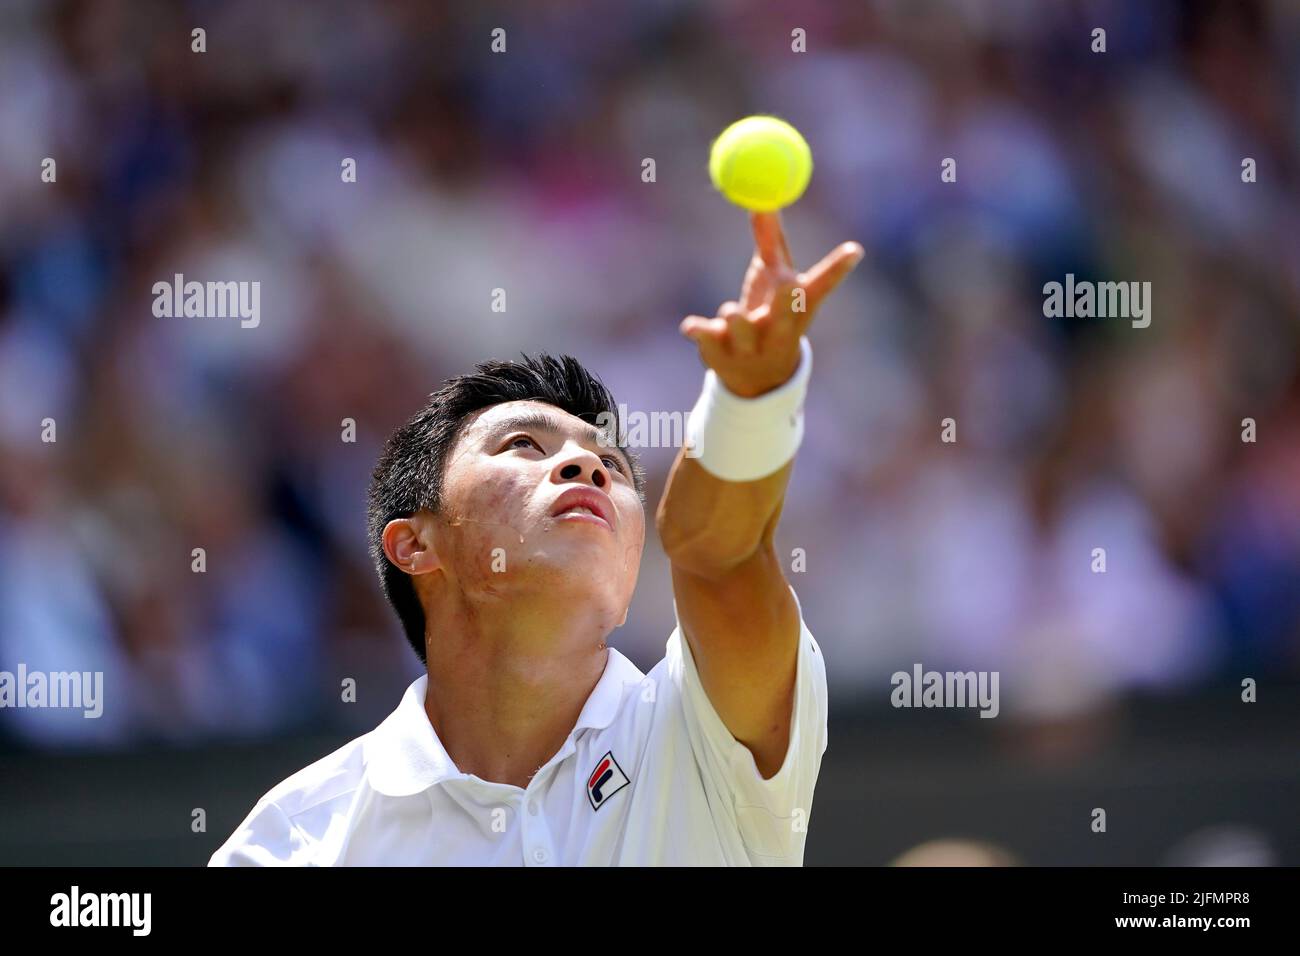 Brandon Nakashima serves during his Gentlemen's singles fourth round match against Nick Kyrgios on centre court on day eight of the 2022 Wimbledon Championships at the All England Lawn Tennis and Croquet Club, Wimbledon. Picture date: Monday July 4, 2022. Stock Photo